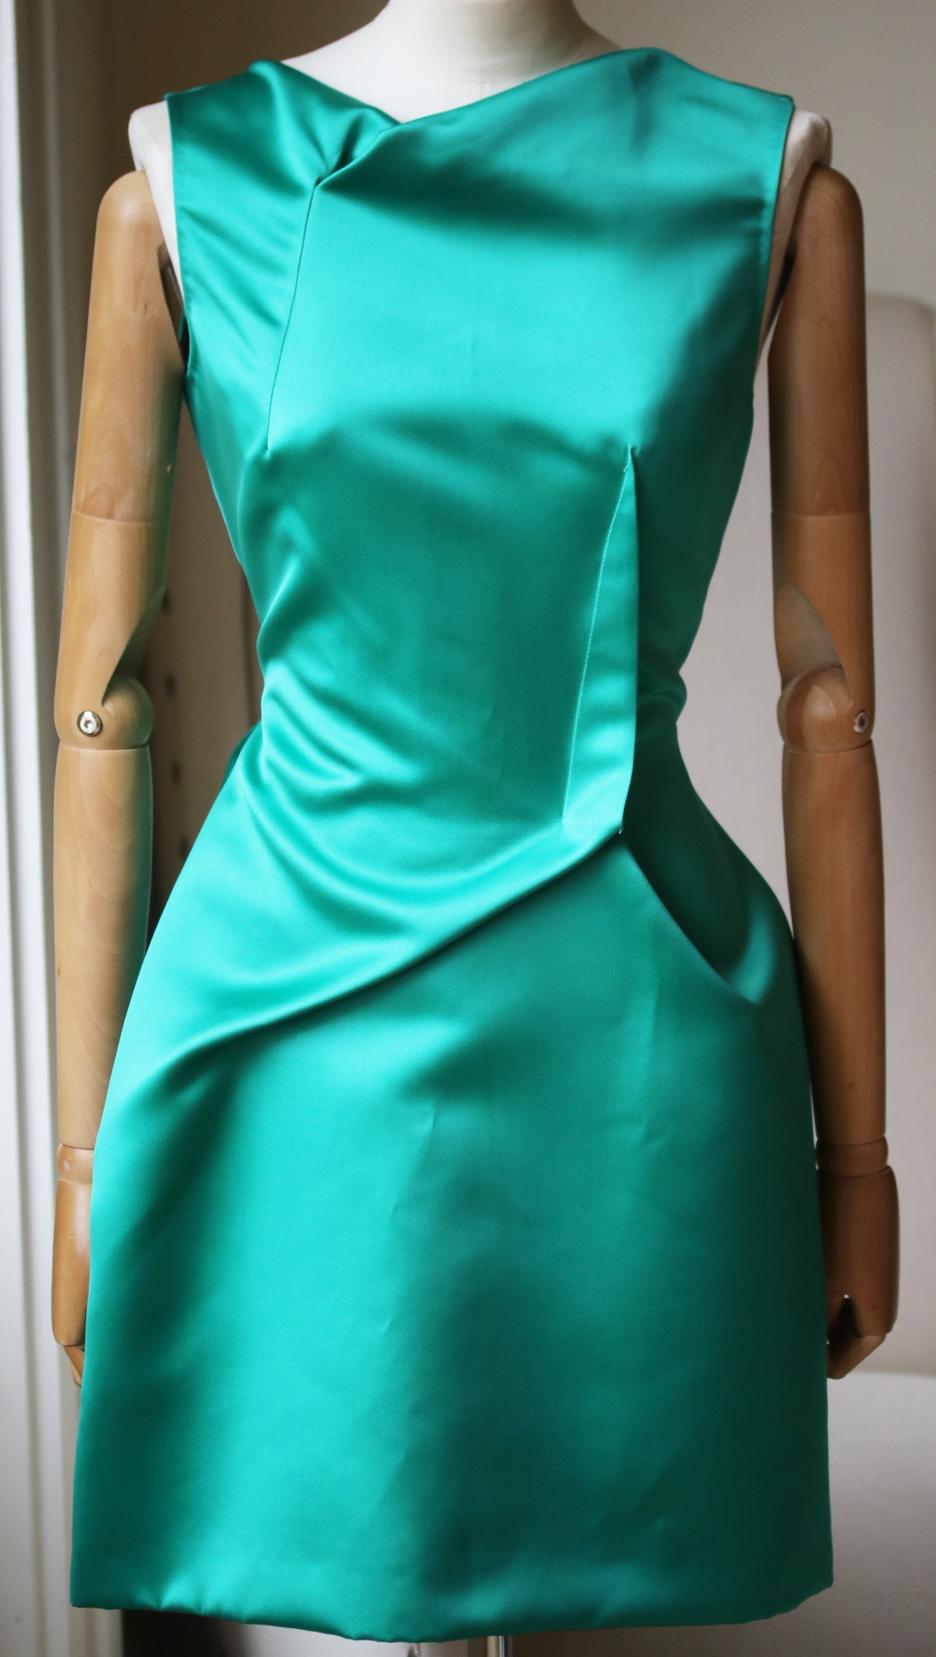 Crafted from smooth satin, it has softly tailored folds that create a flattering, contoured shape. Jade satin. Zip fastening through back. 100% polyester. 

Size: UK 12 (US 8, FR 40, IT 44)

Condition: As new condition, no sign of wear.